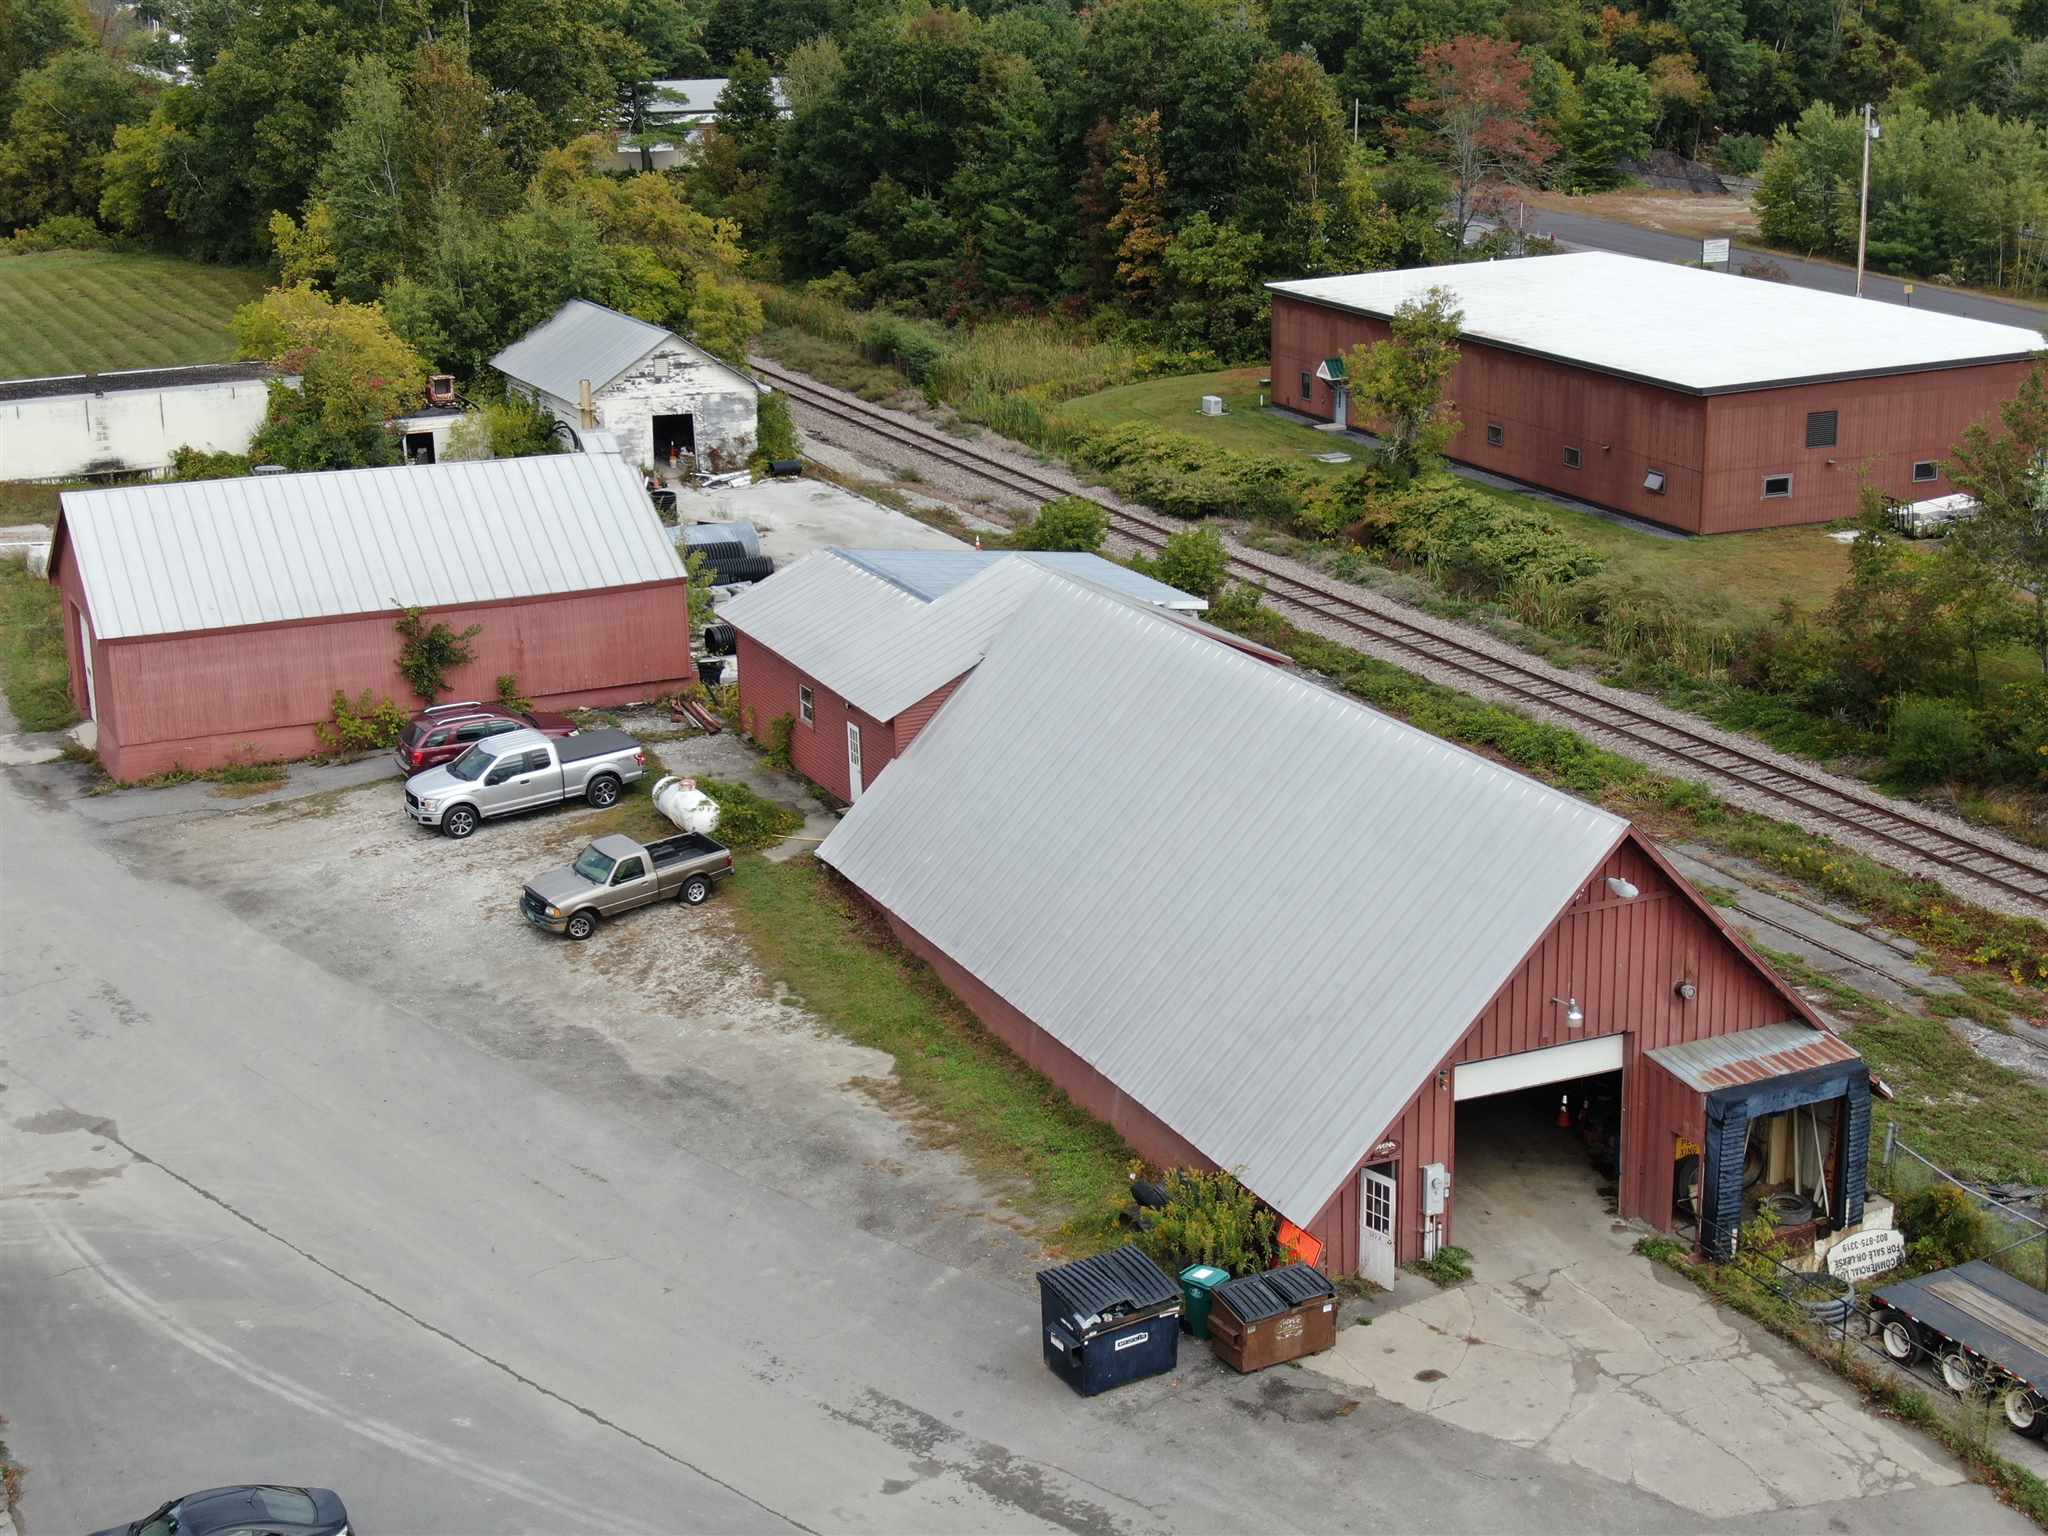 134 Gold River Extension 1A1, Chester, VT 05143